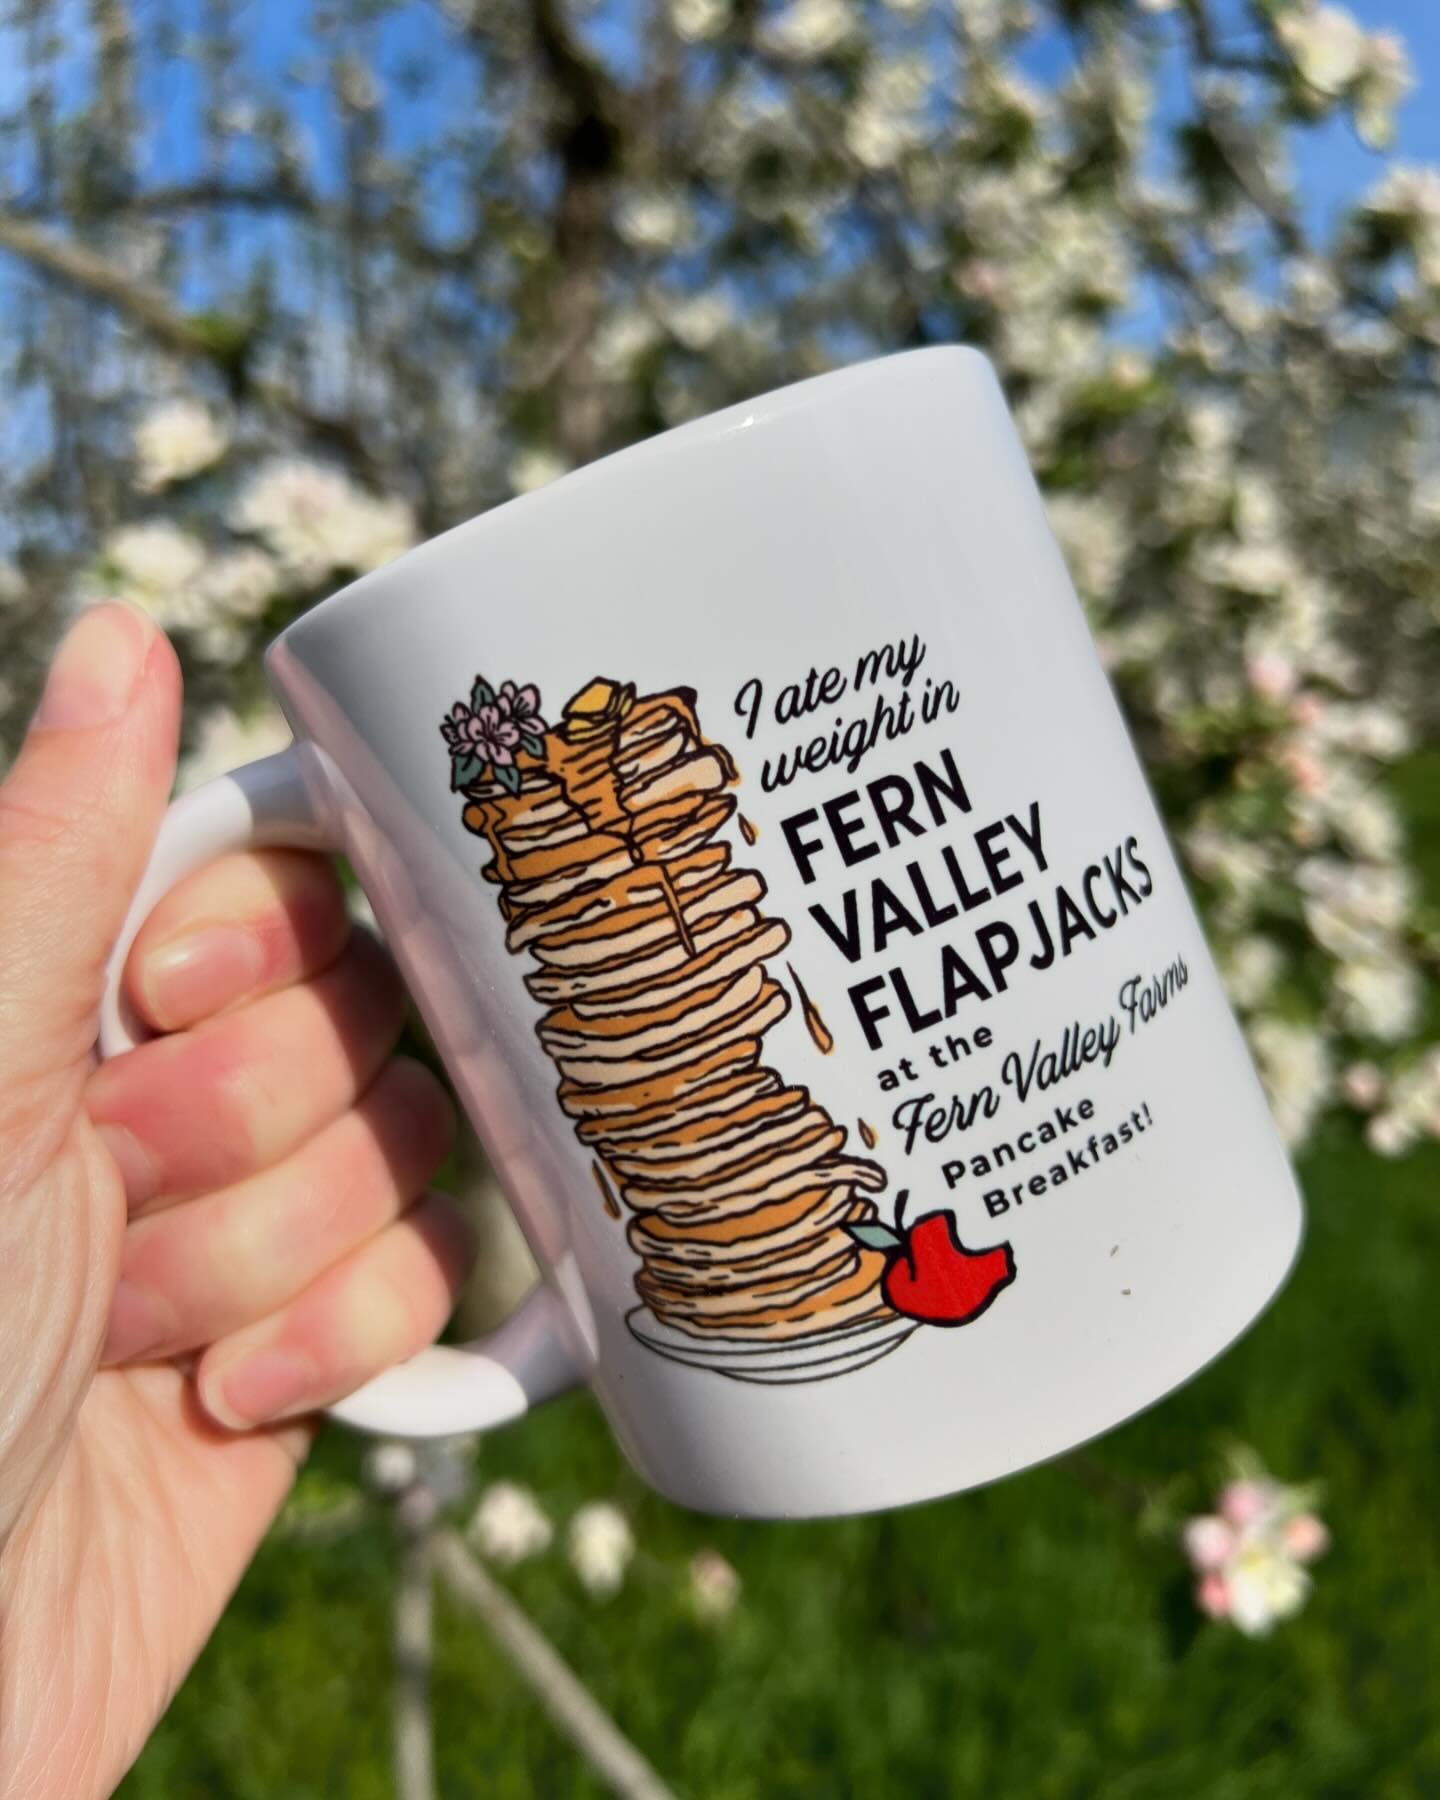 🥞VERY RARE🥞 limited edition pancake merch designed for @fern_valley_farms ! Coffee mugs commemorating the innaugural Apple Blossom Pancake Breakfast this weekend. Only 50 mugs to be had - get yours up at the orchard and get ready to EAT 👏🥞🥞🥞🥞?